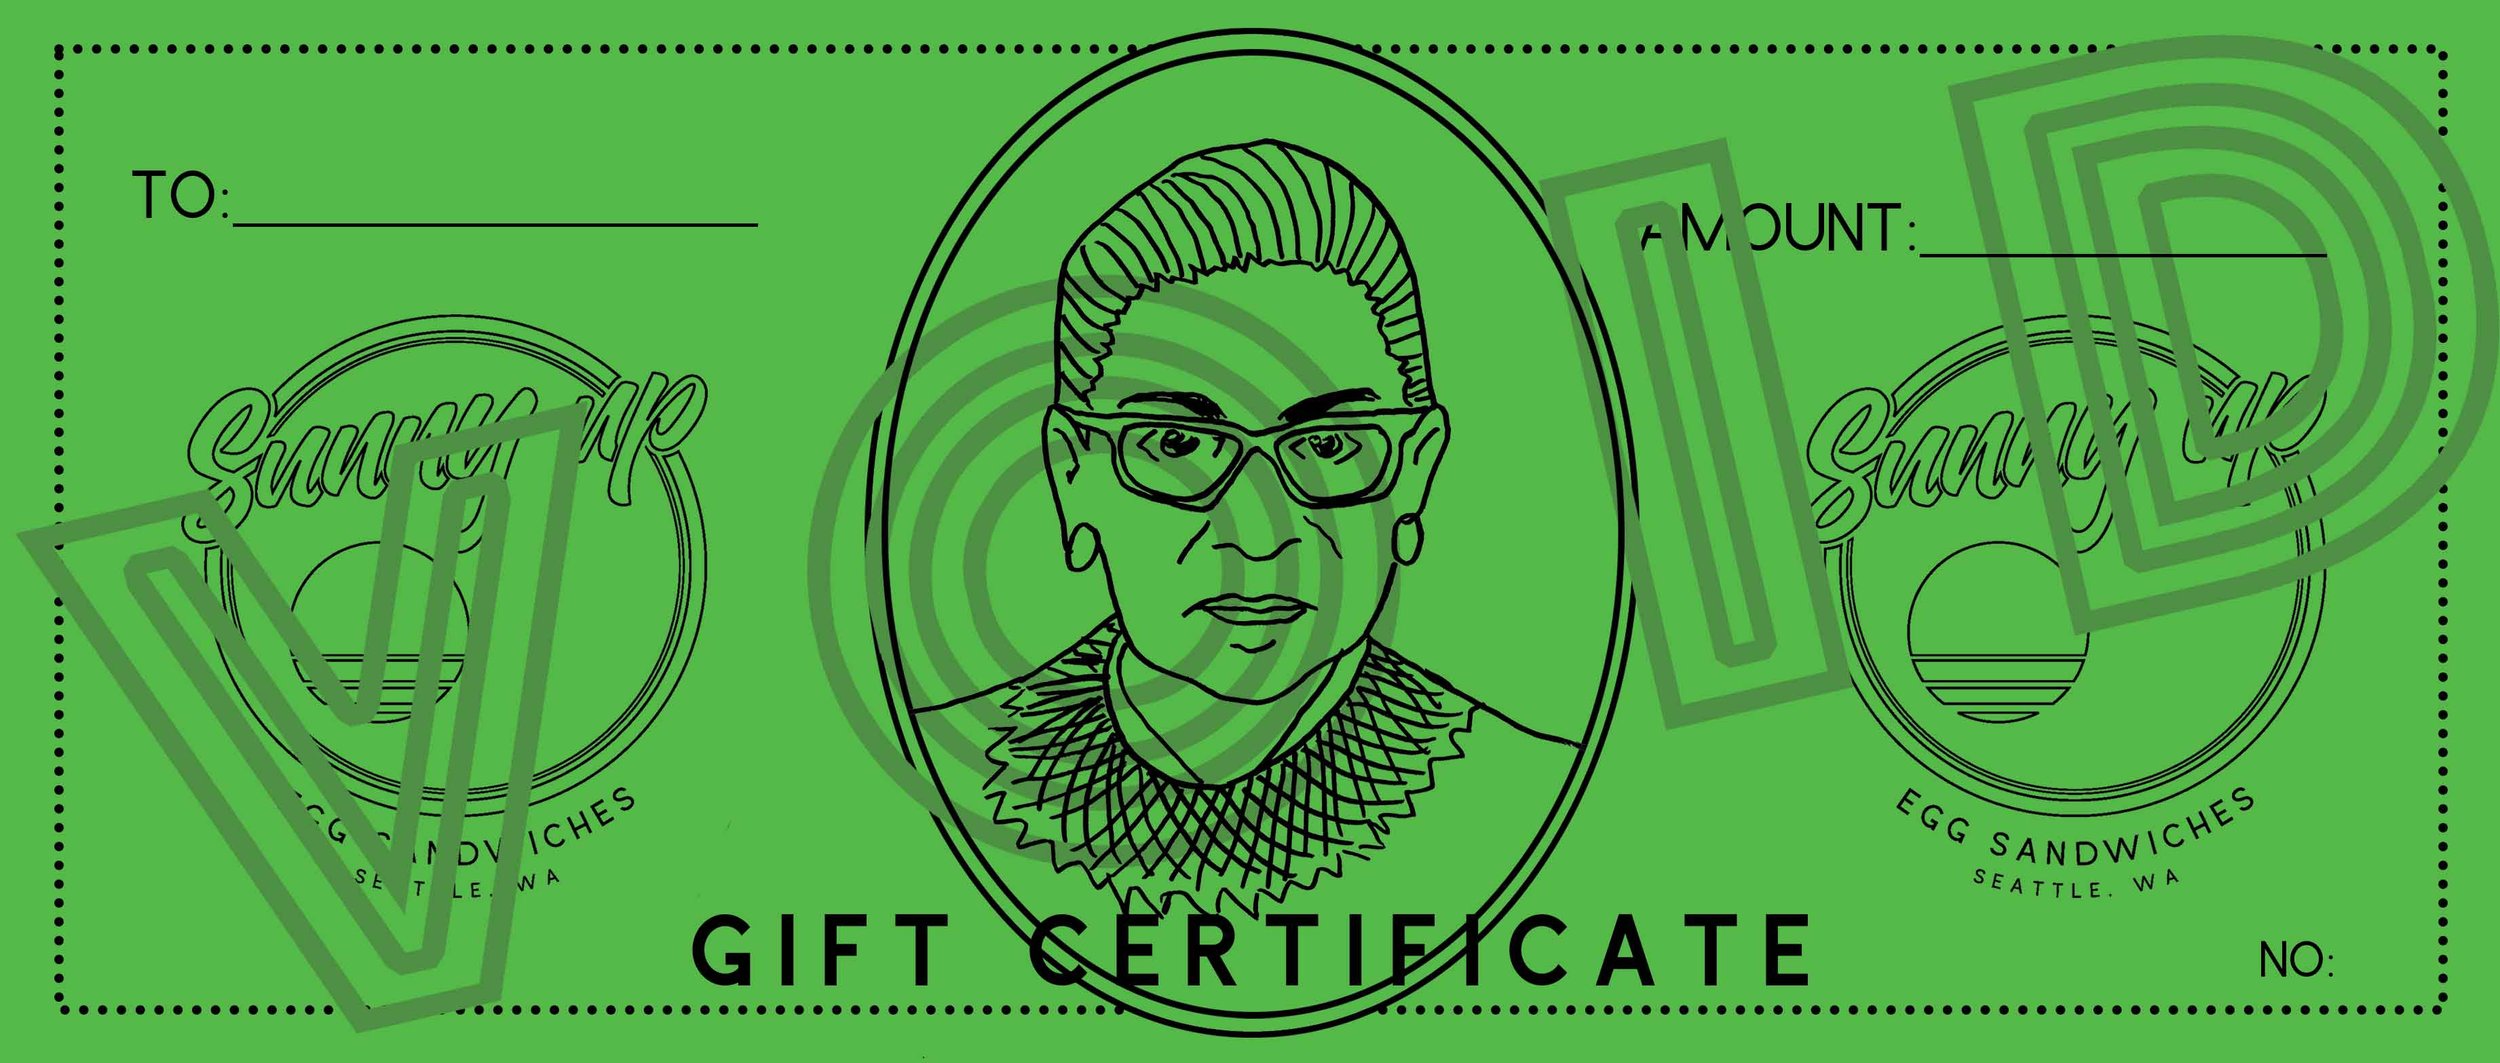 Paper gift certificate